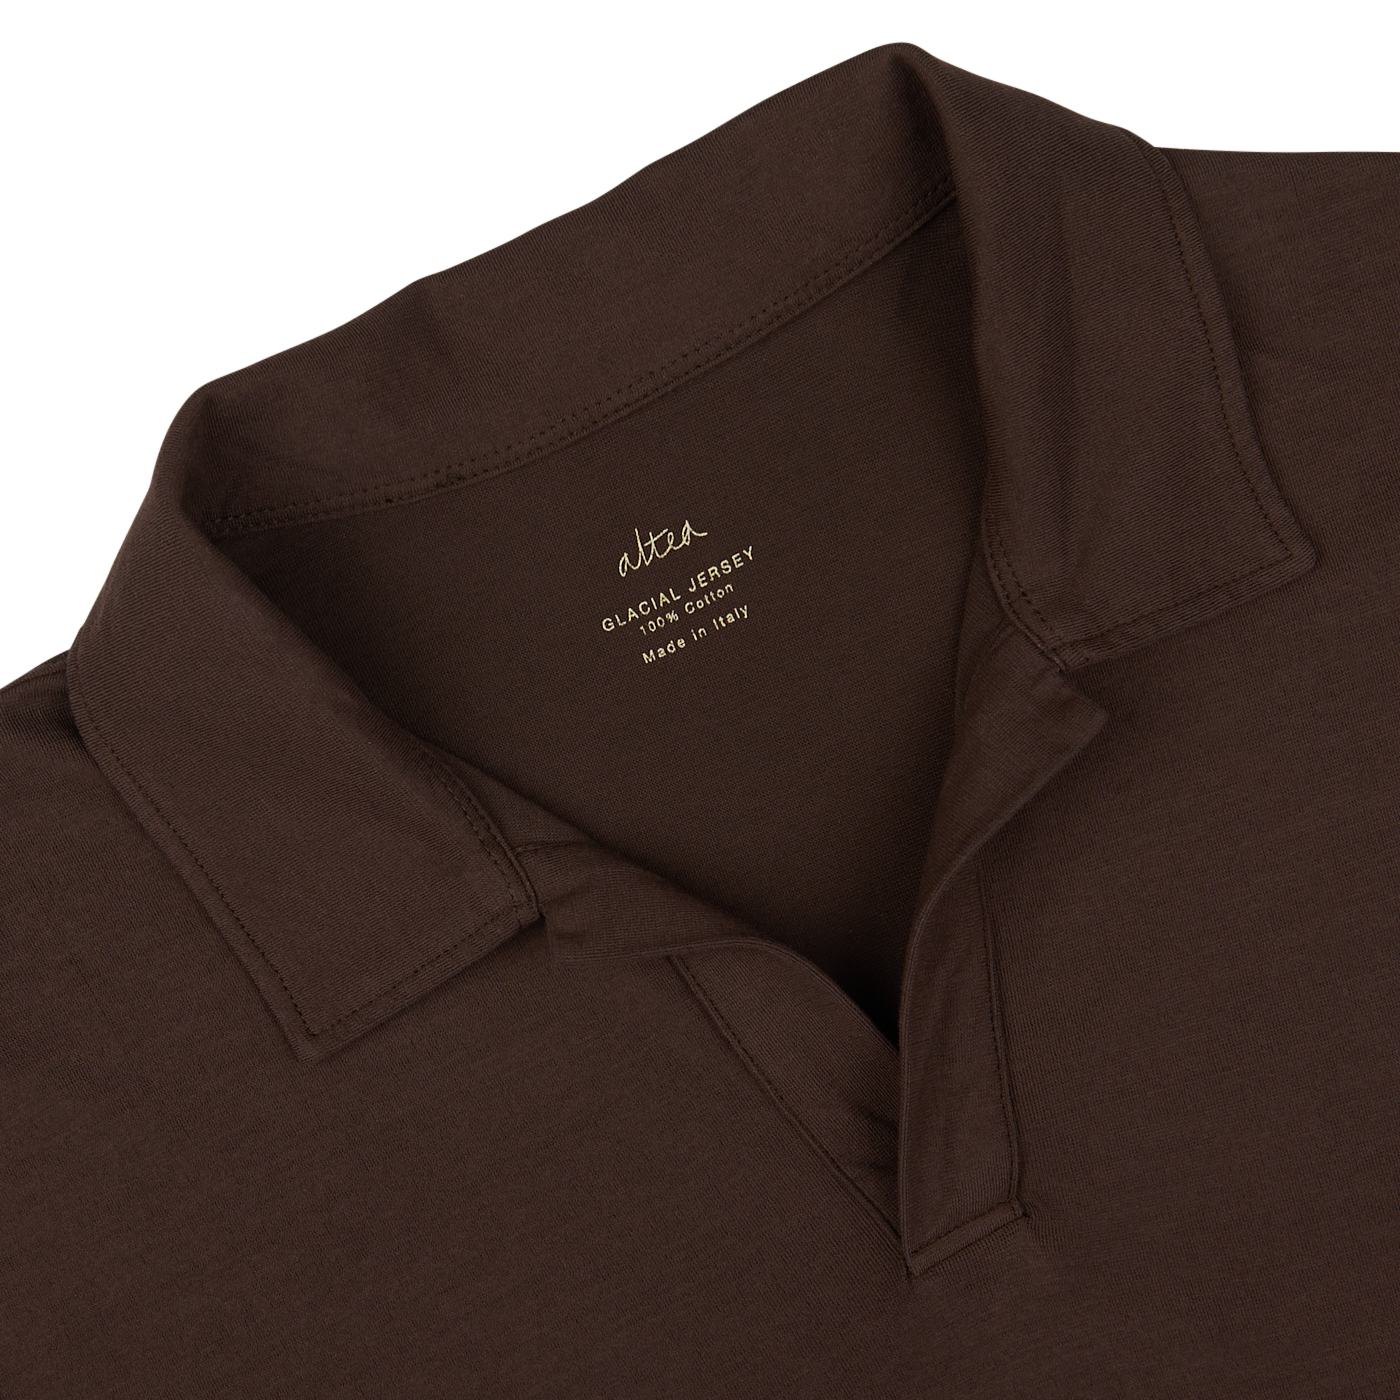 Close-up of a dark brown Altea Cotton Jersey Capri Collar Polo Shirt with a tag showing the brand and material details of the seasonal polo shirt.